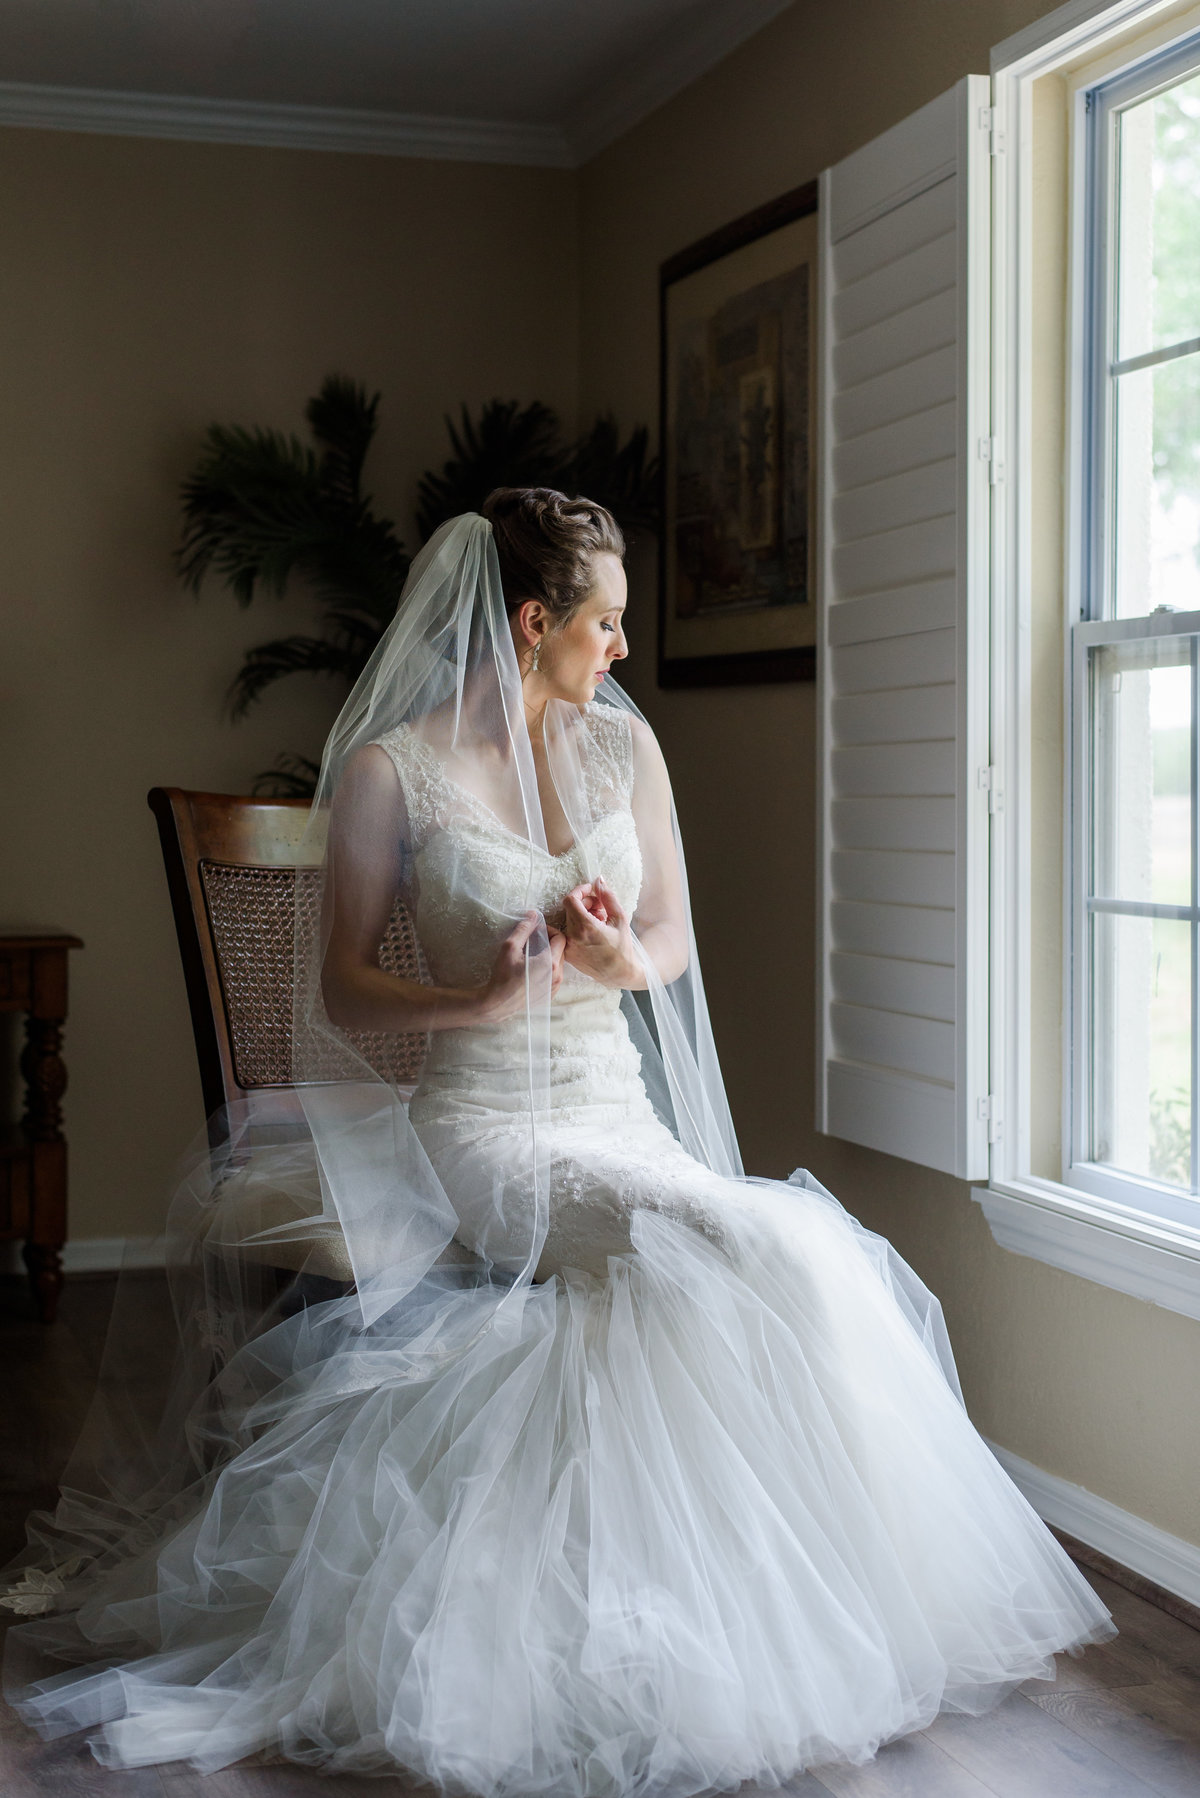 Bride sitting in window light as she looks out the window